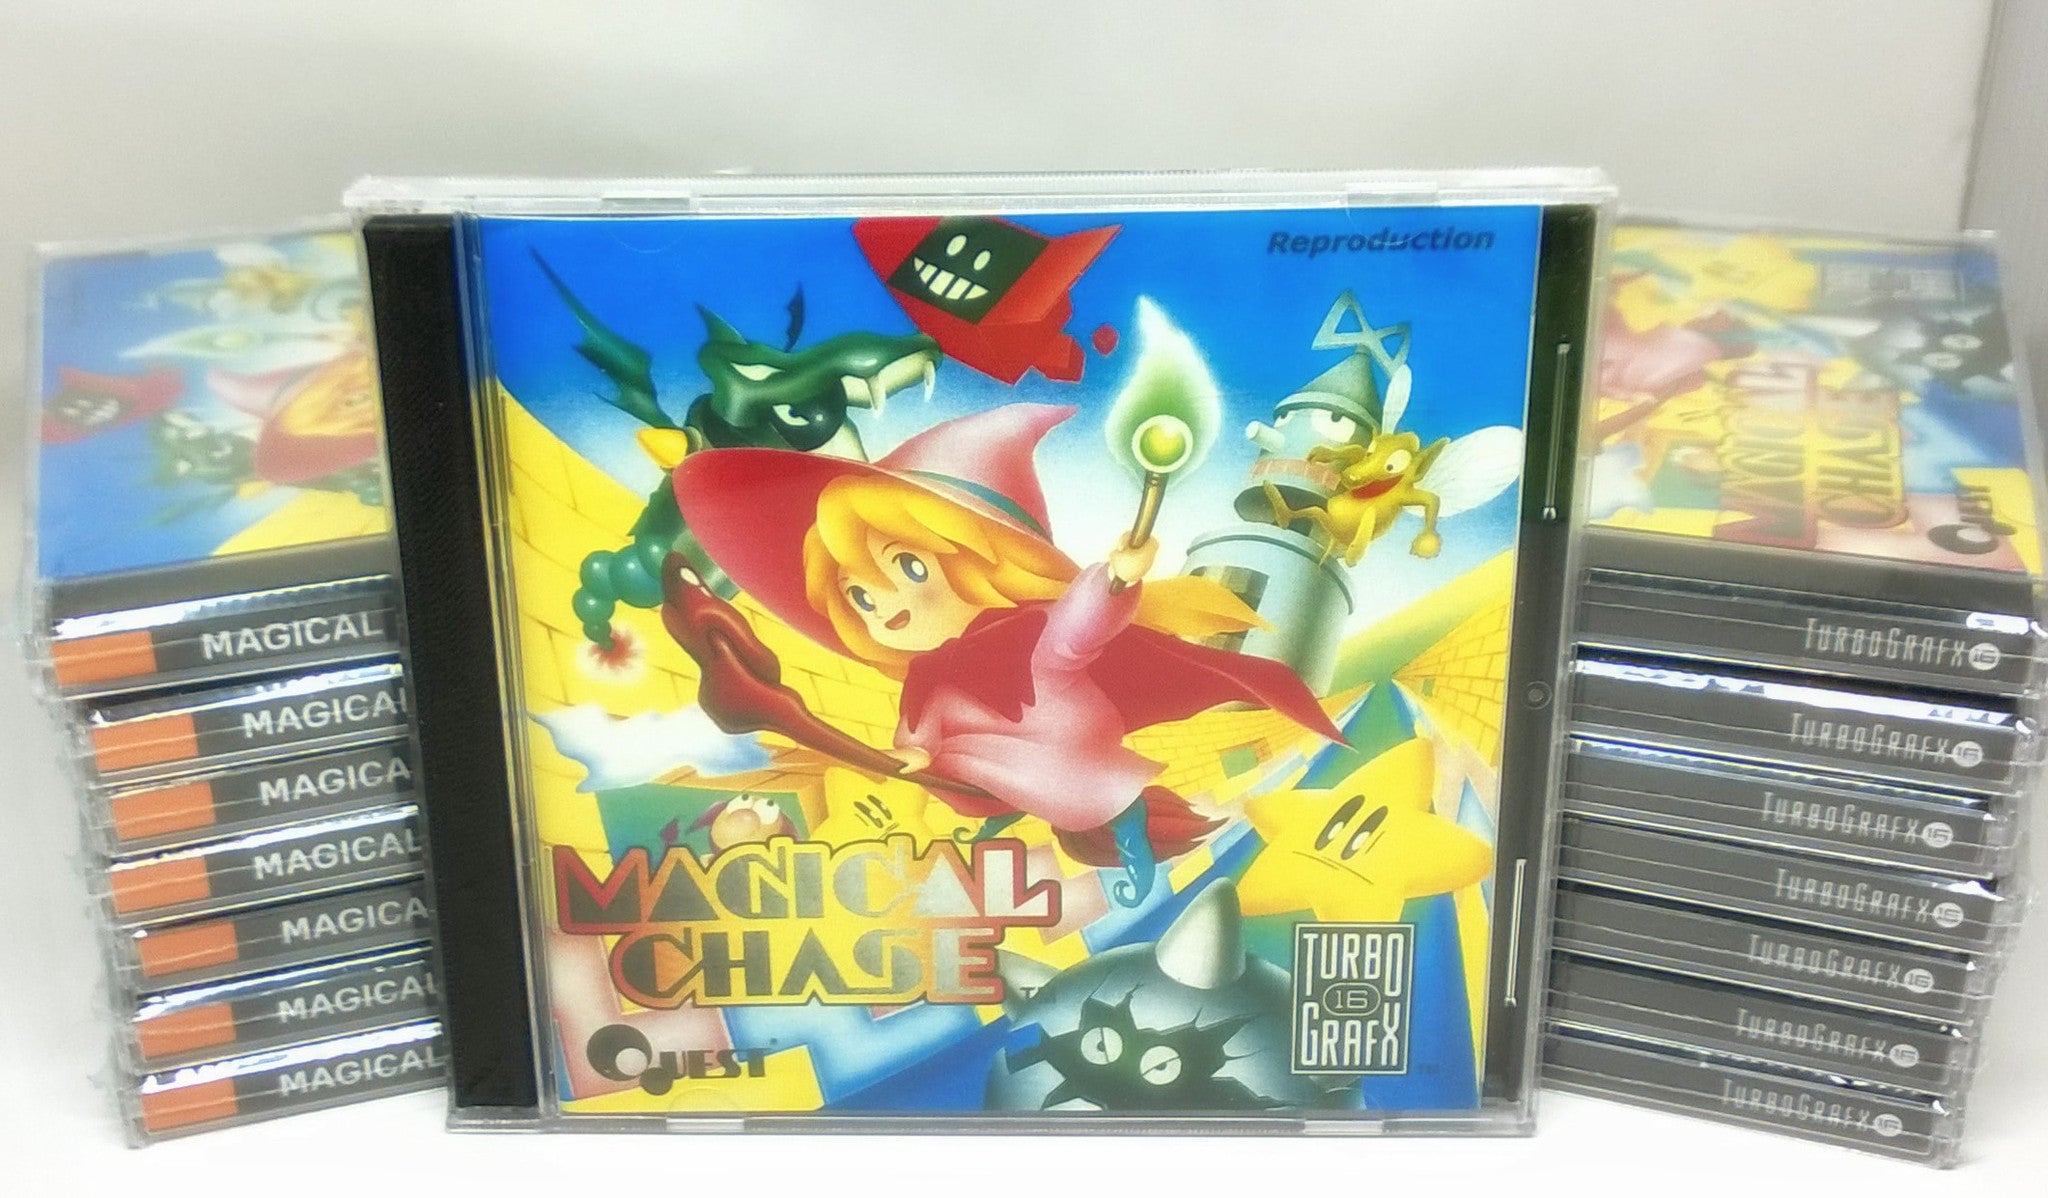 Magical Chase Reproduction TurboGrafx-16 Game back in stock!